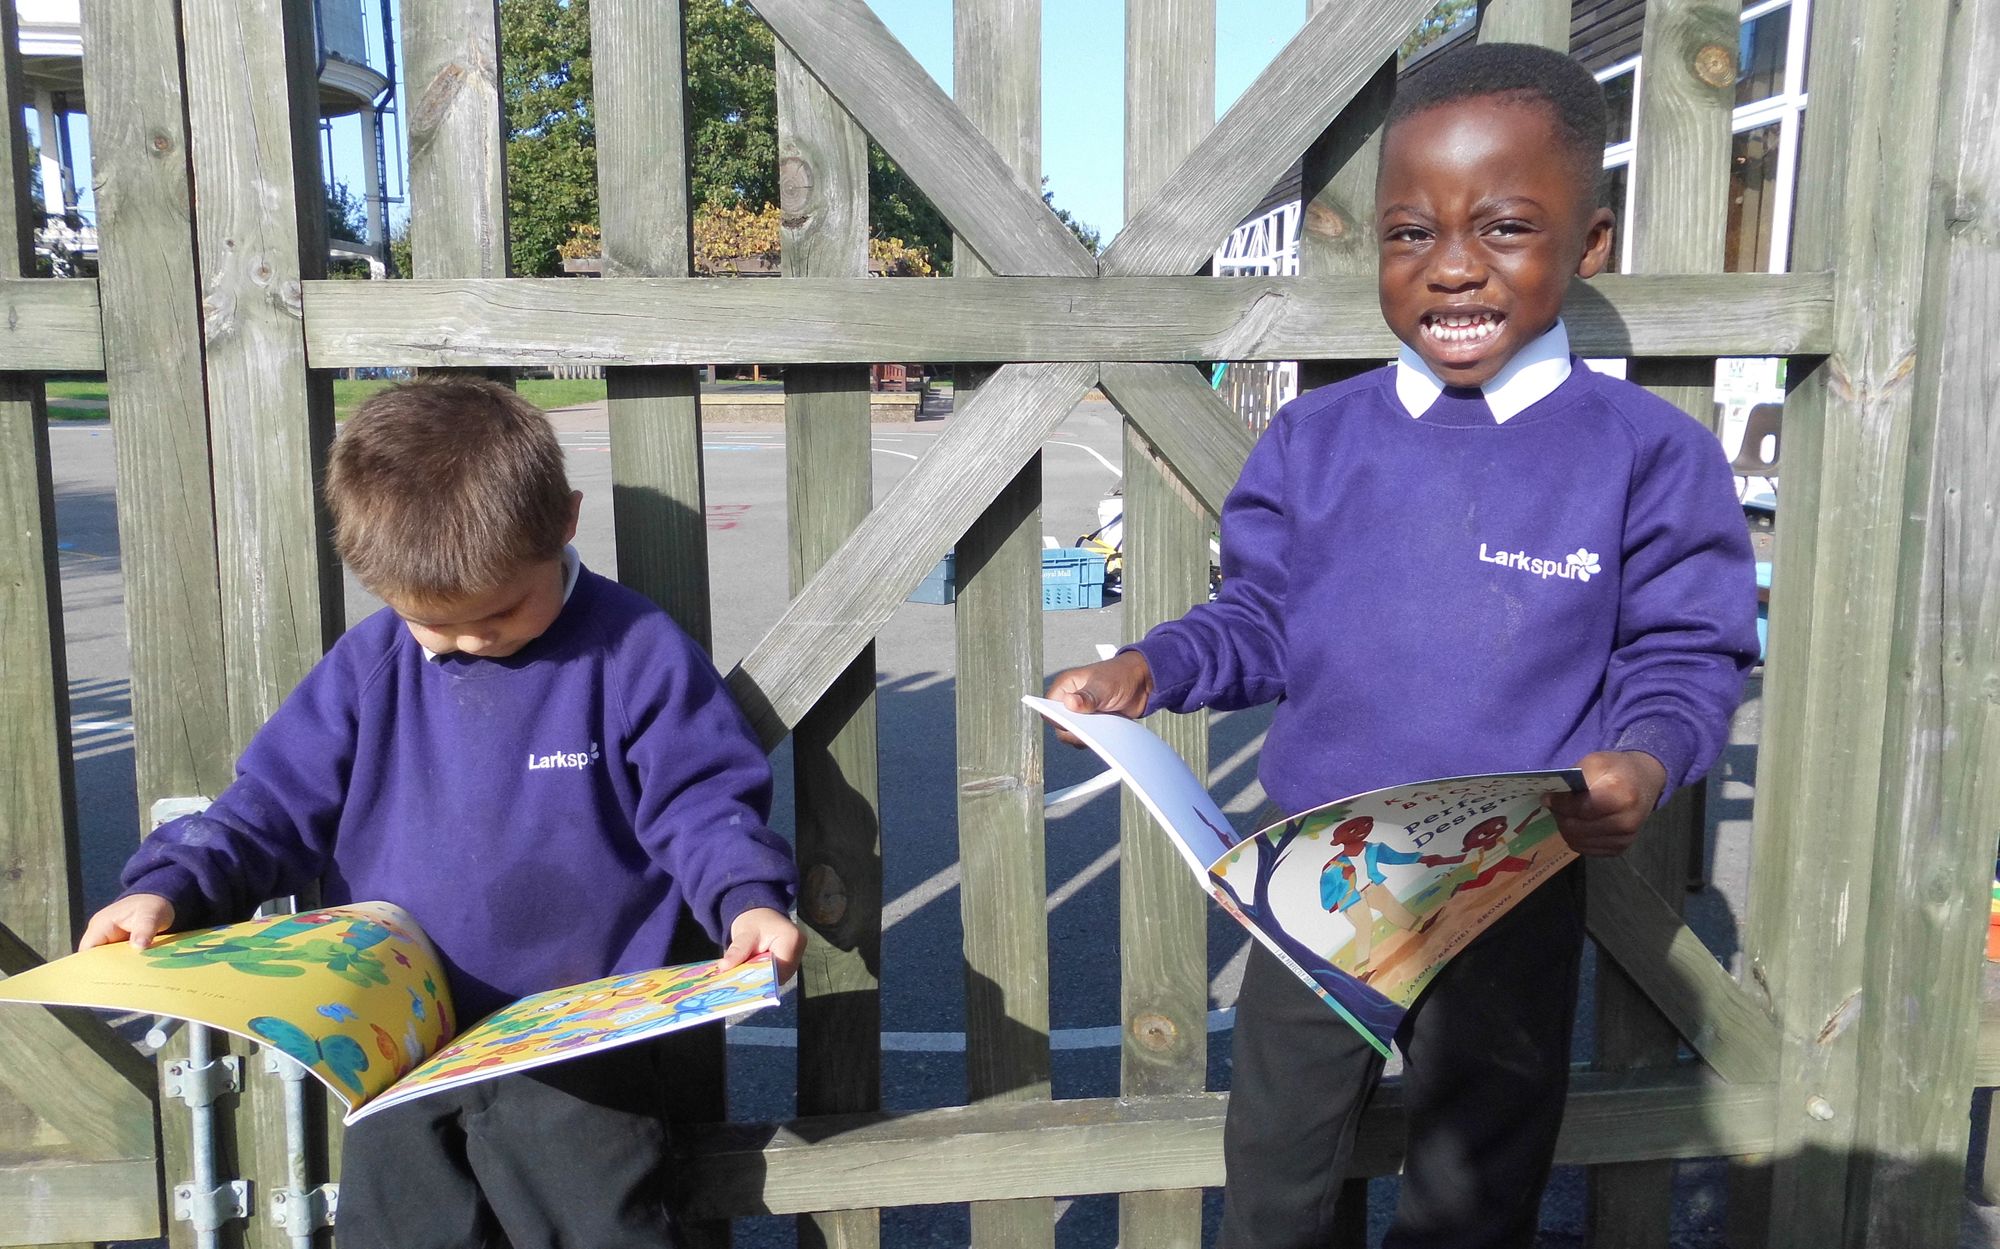 Two young children in purple school uniform stand looking at picture books in front of the camera